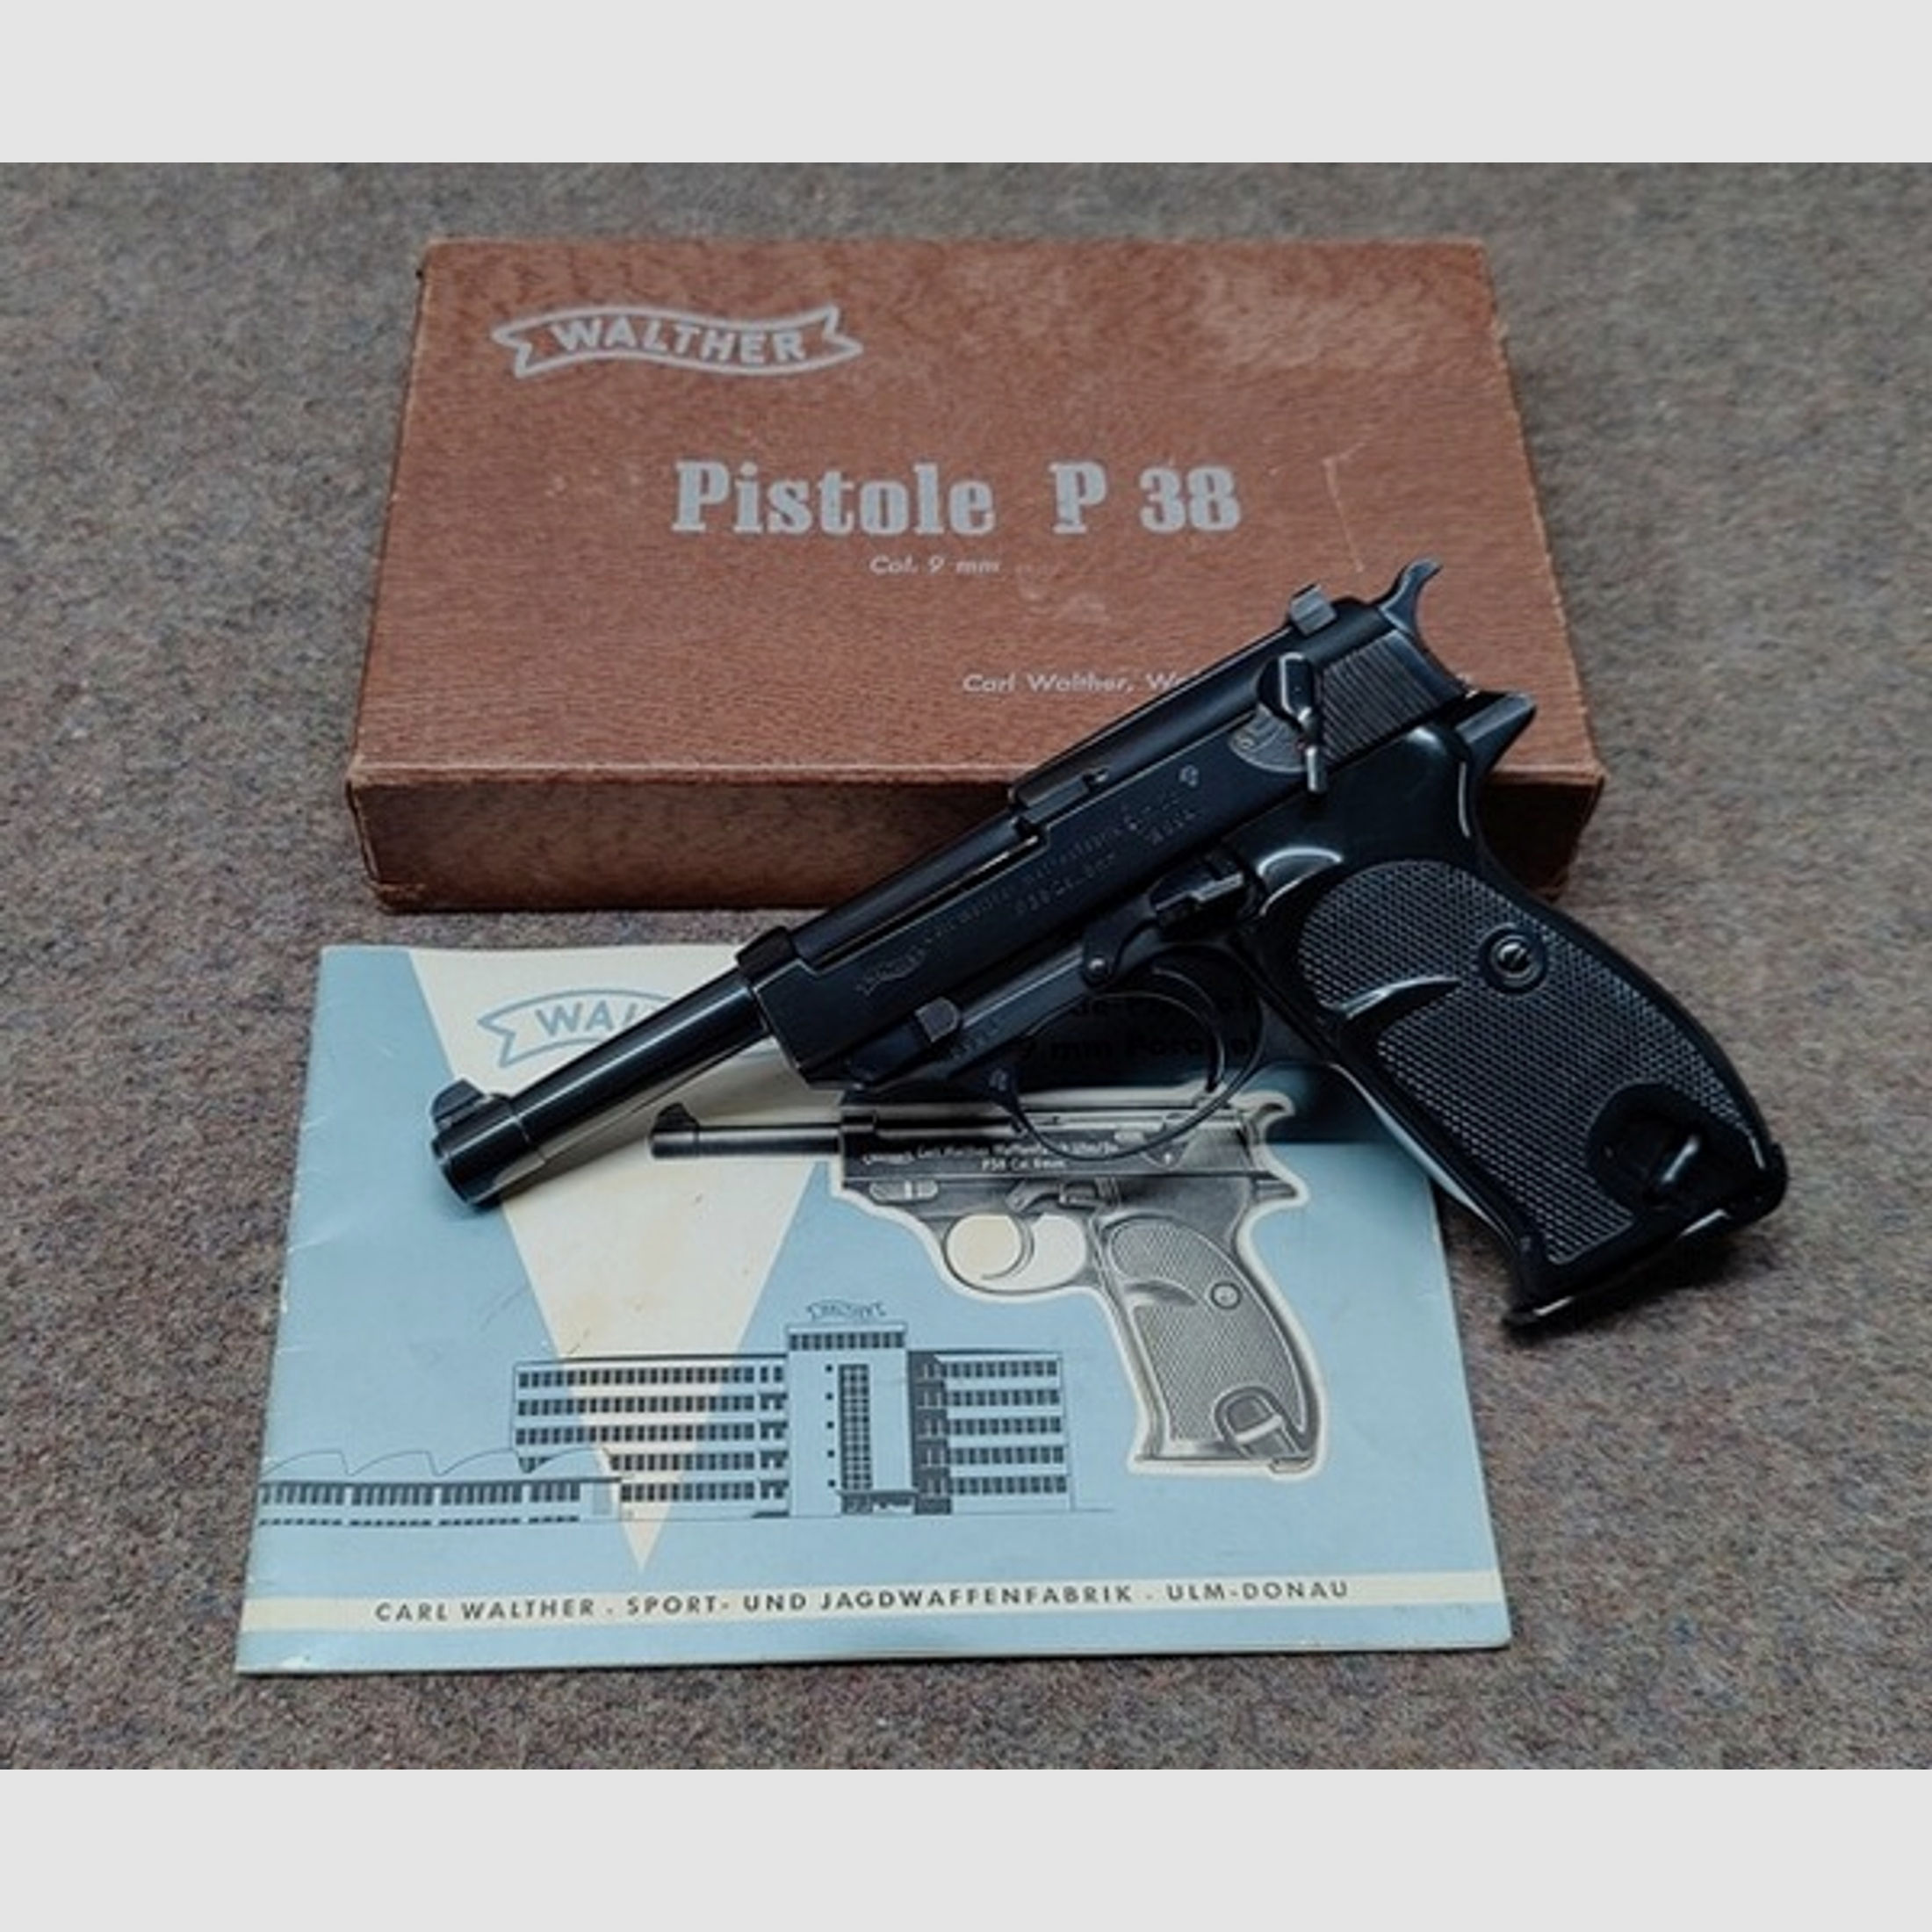 Pistole Walther P38 Kal. 9 mm Luger